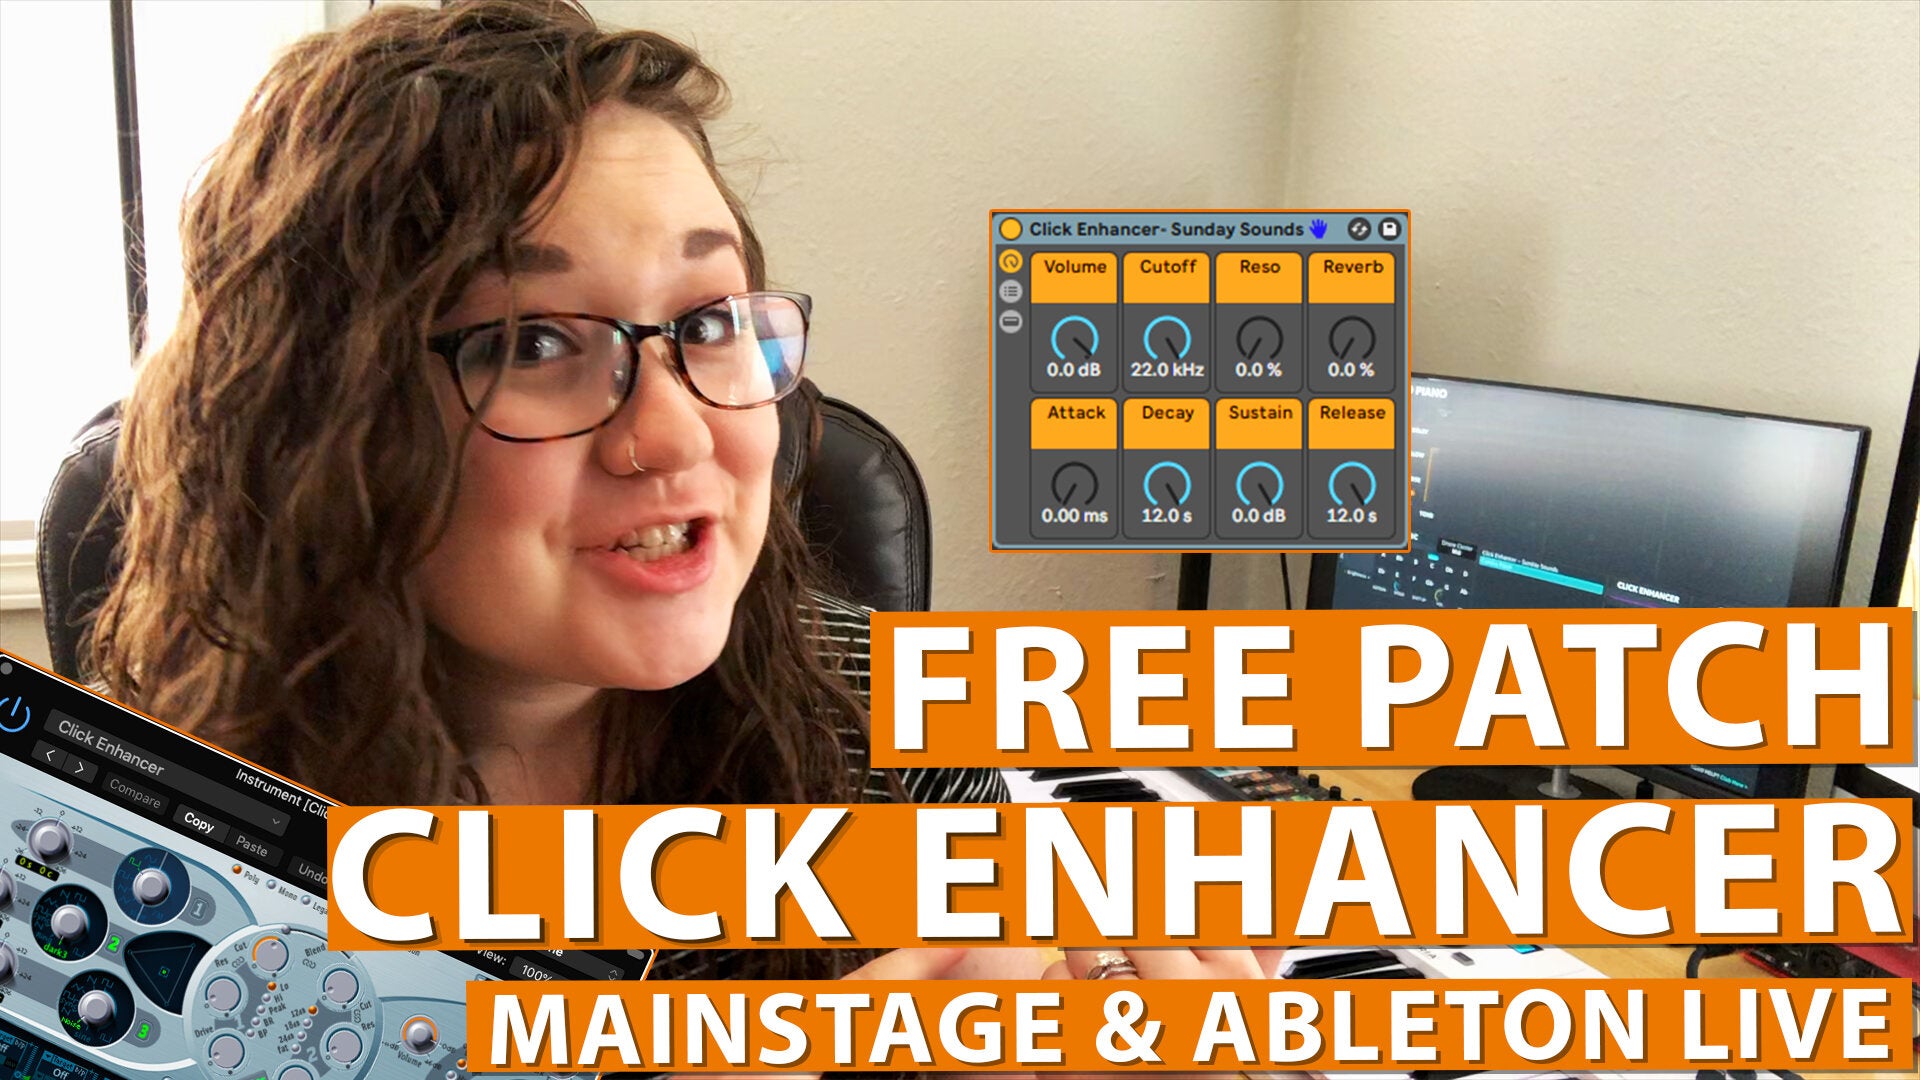 Free MainStage & Ableton Worship Patch! - Click Enhancer